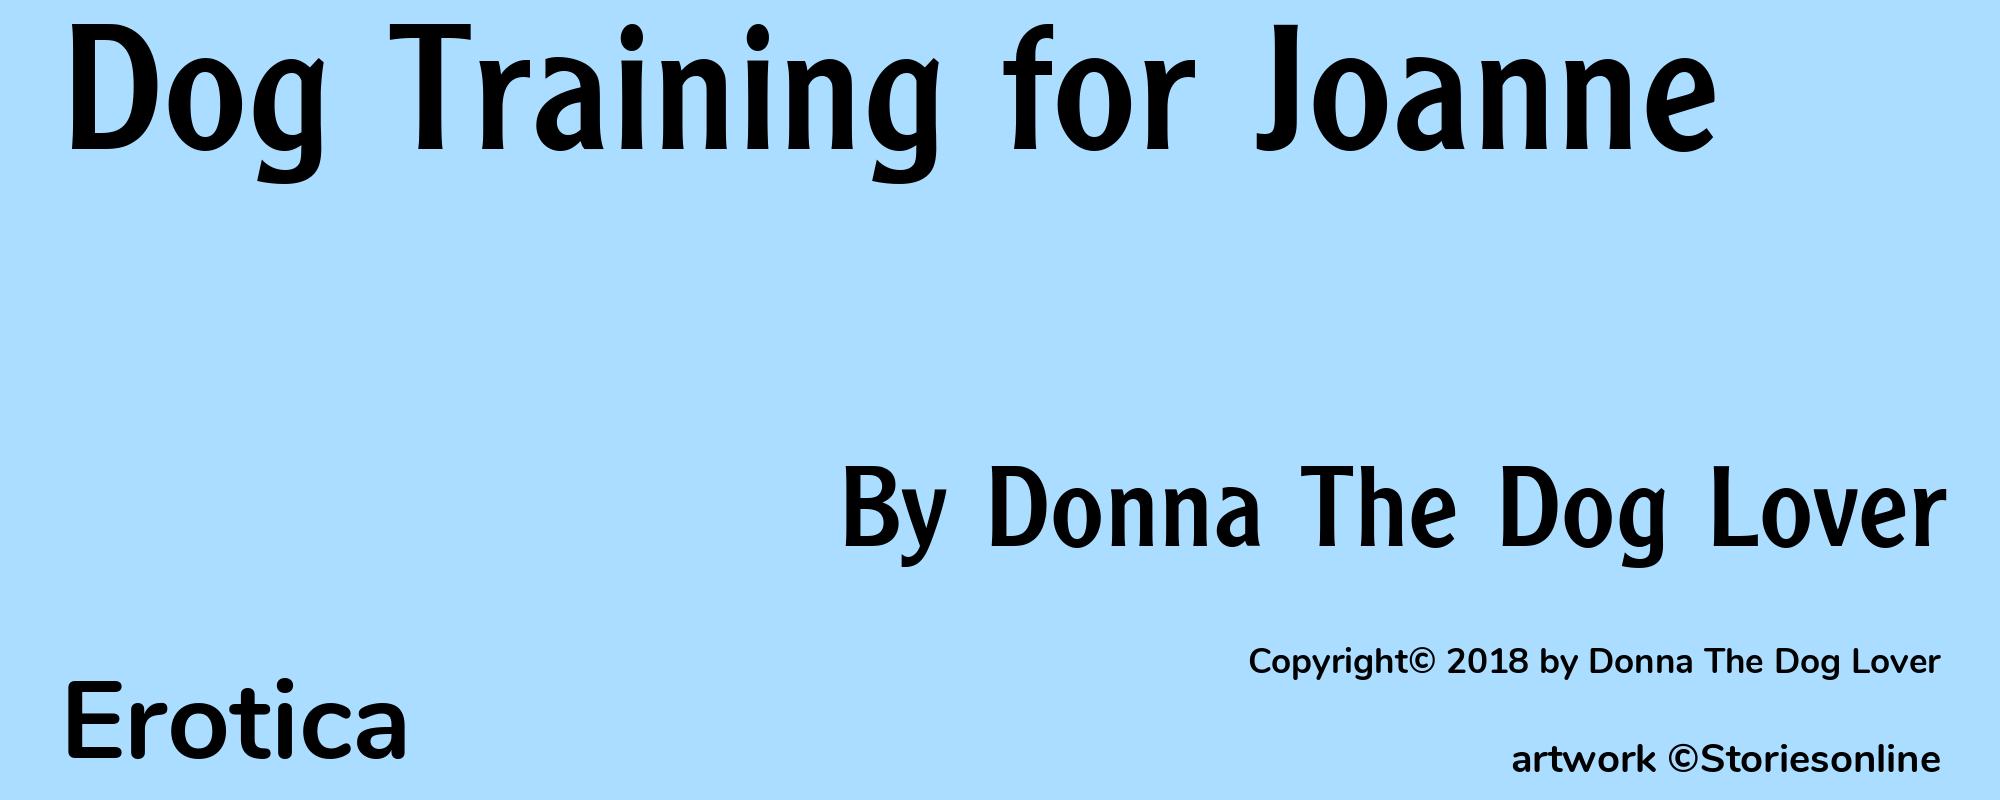 Dog Training for Joanne - Cover